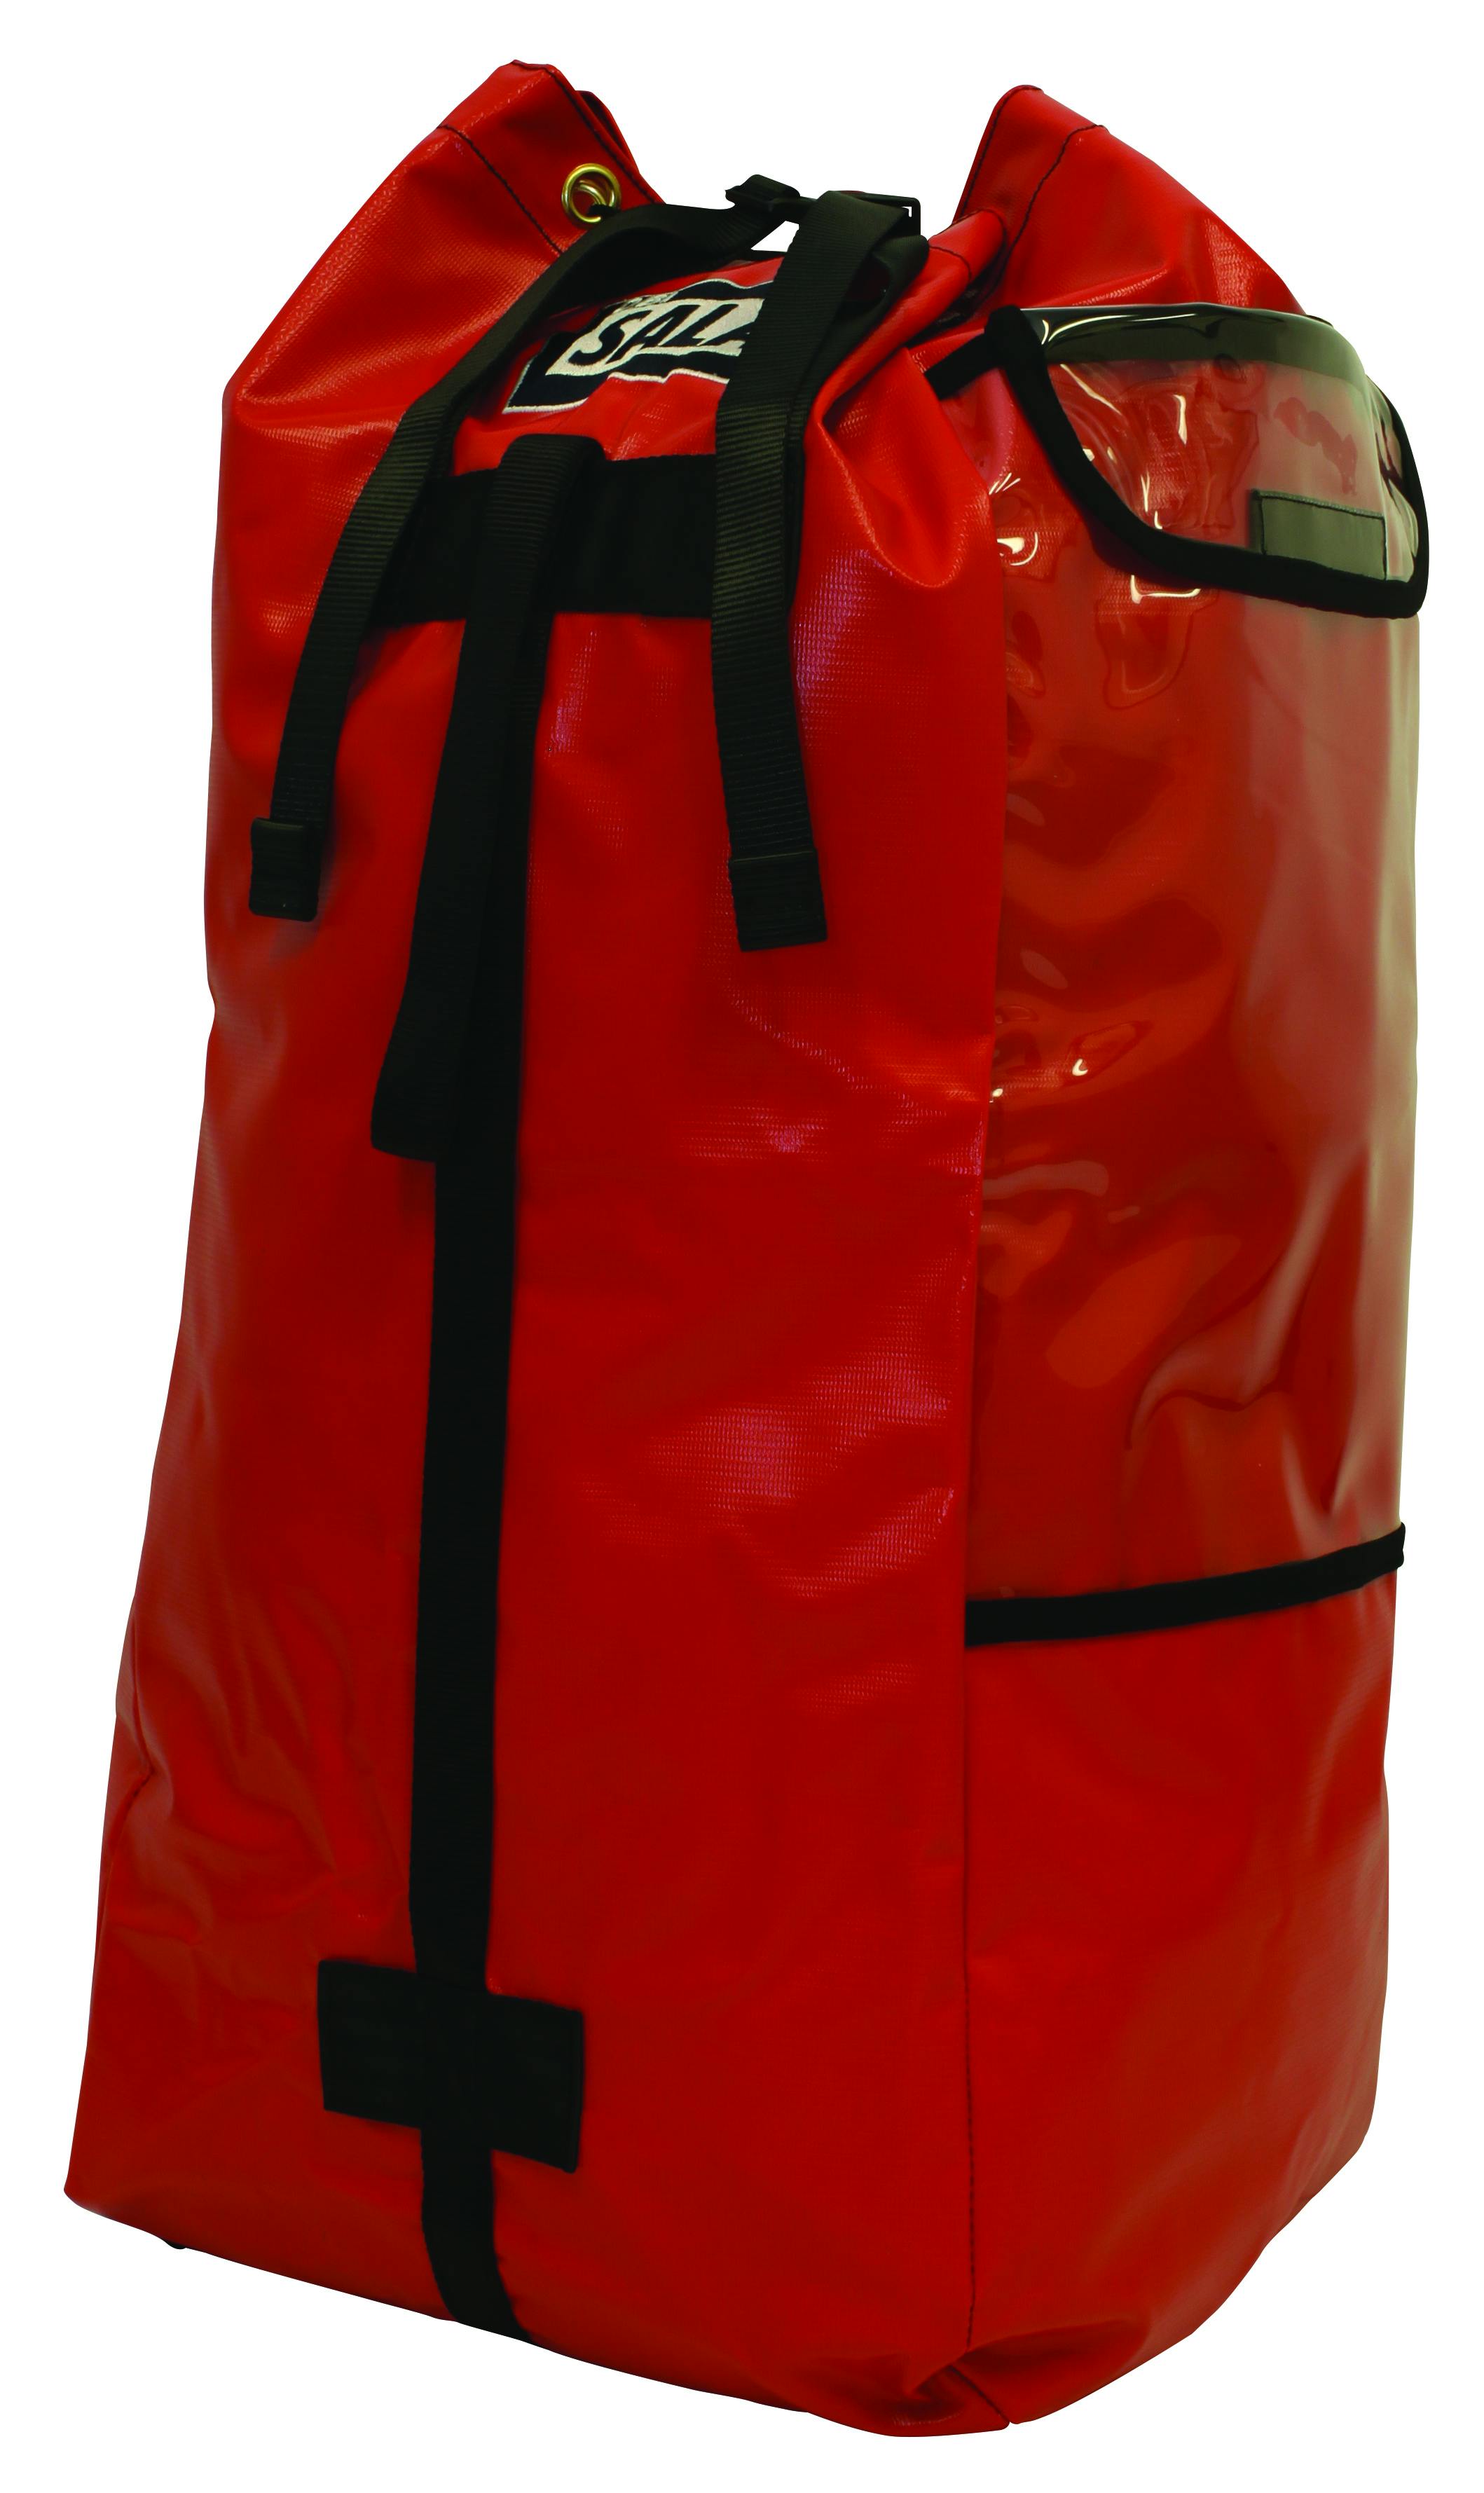 3M™ DBI-SALA® Rollgliss™ Technical Rescue Rope Bag 8700224, Red, 1 EA/Case